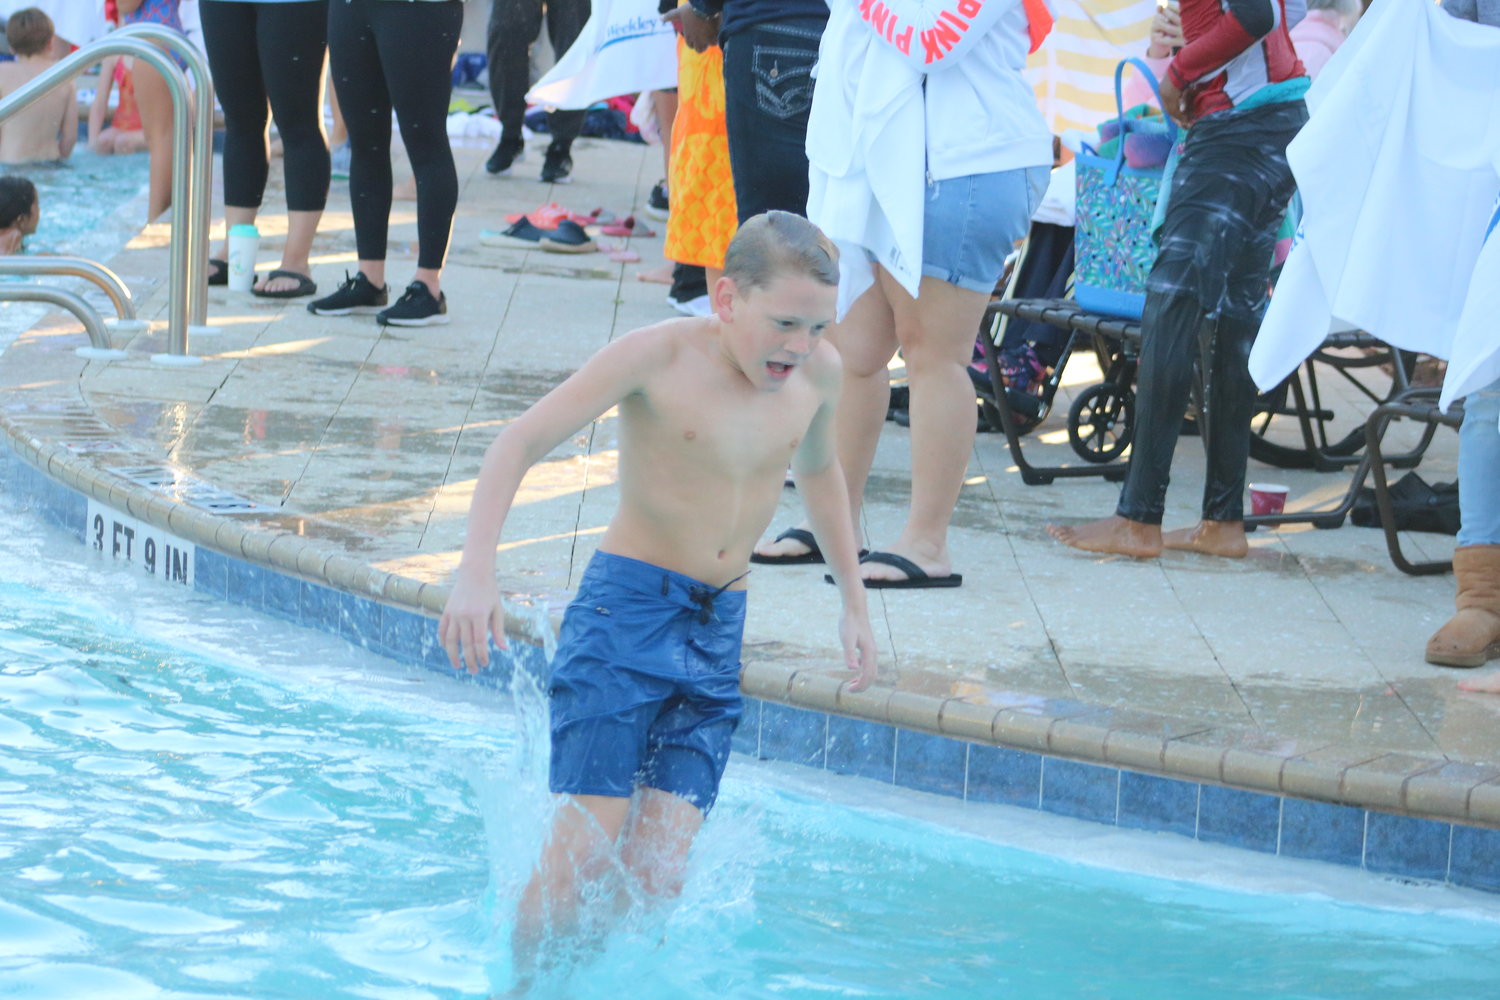 A second polar plunge was even taken by some.